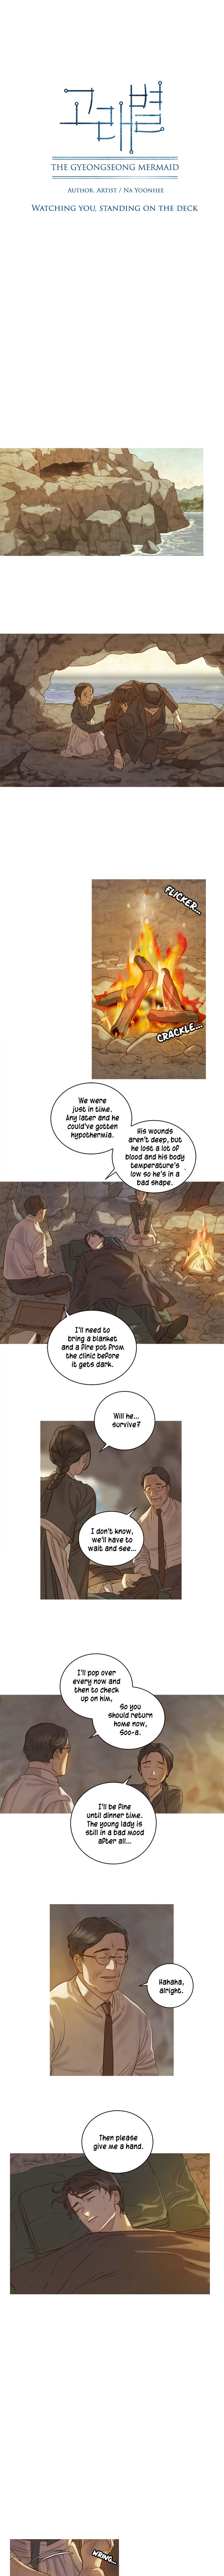 Gorae Byul - The Gyeongseong Mermaid - Chapter 2 Page 2